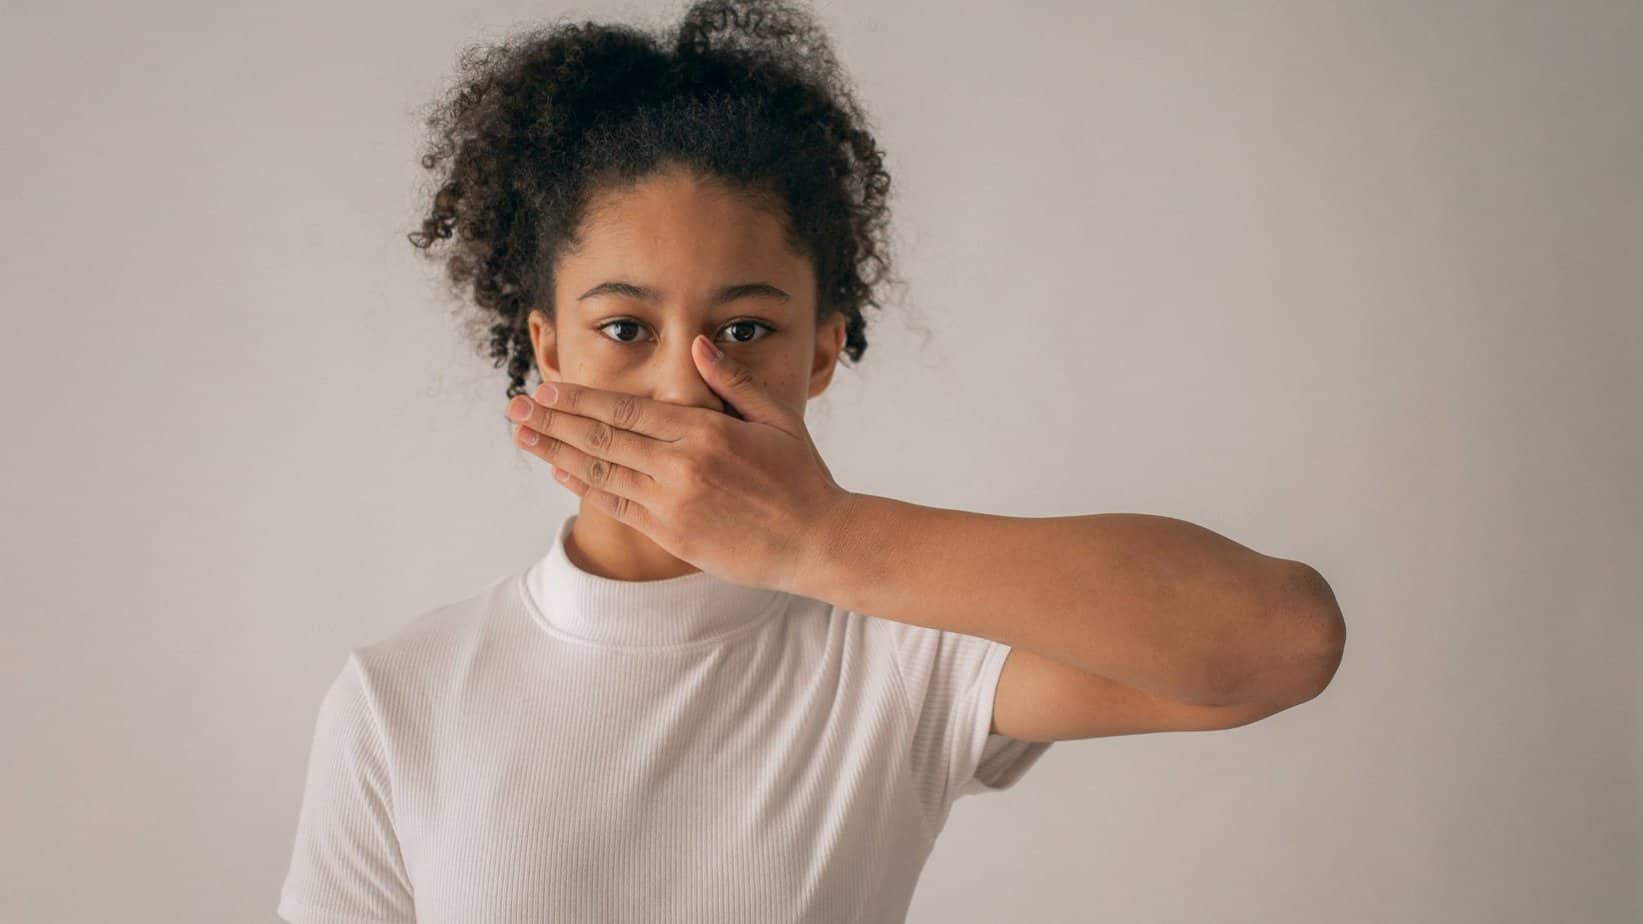 woman with curly hair in white t-shirt holding her hand sideways covering her mouth